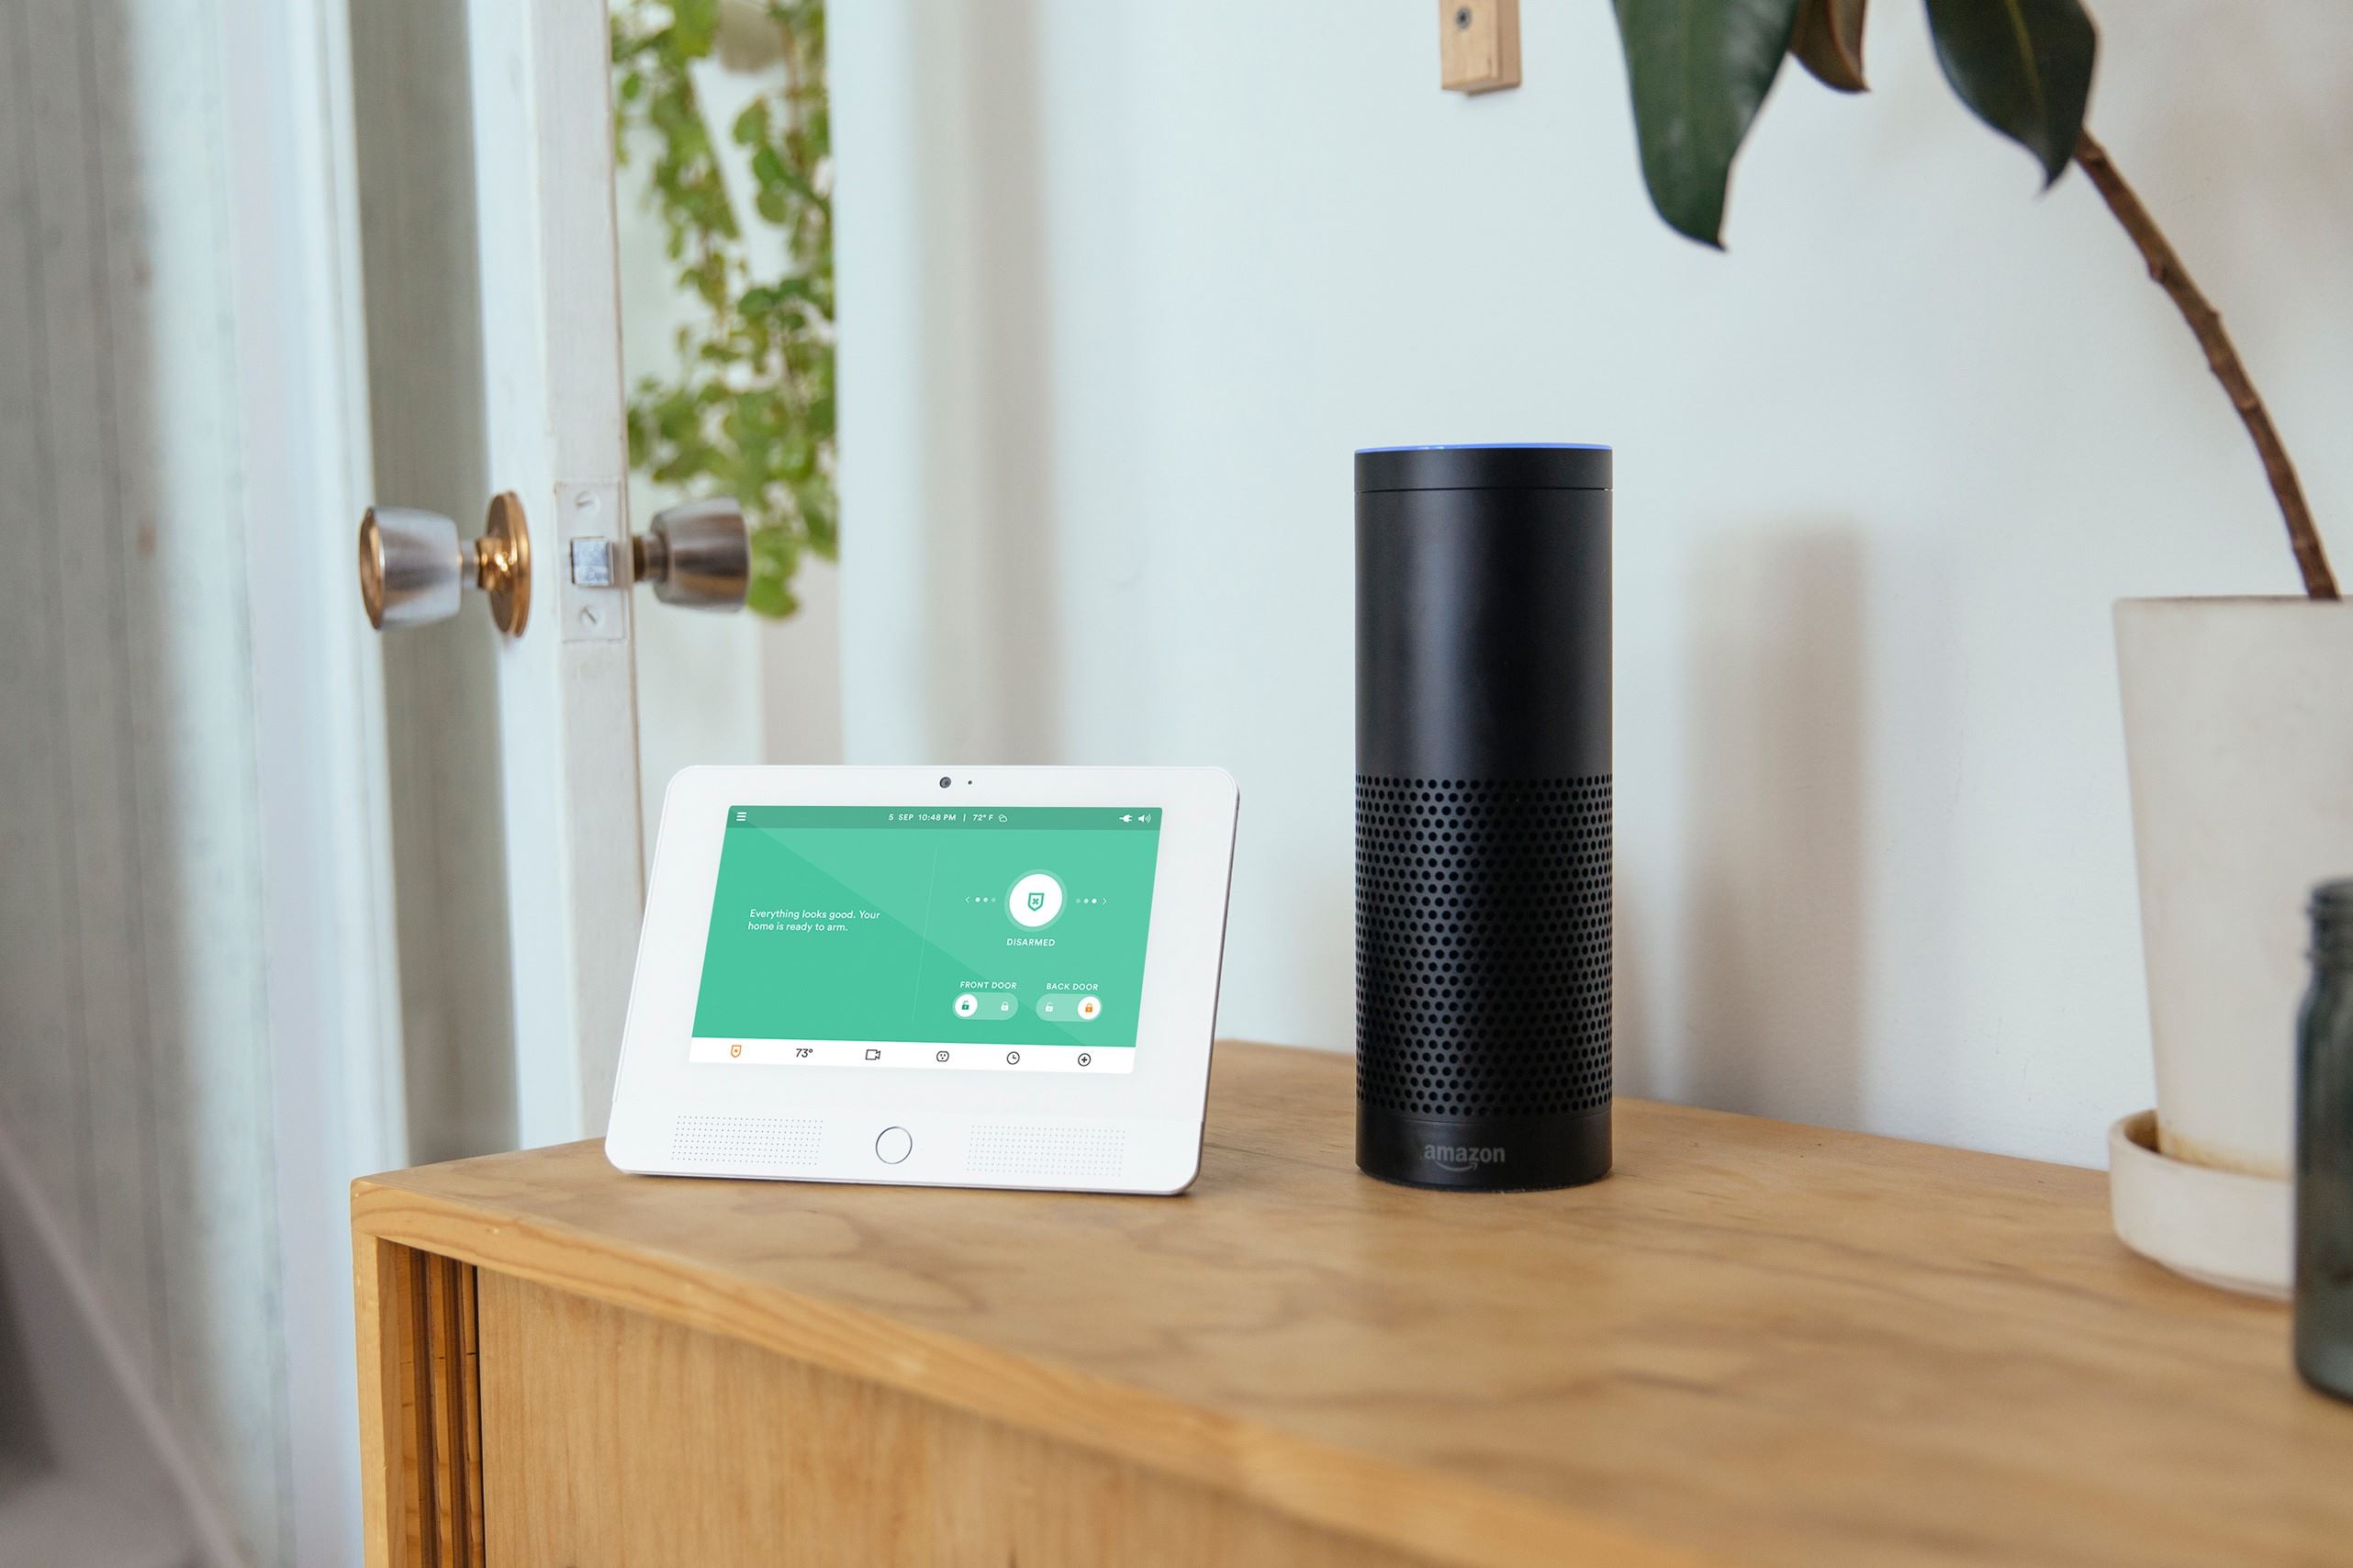 How To Connect Amazon Echo To Vivint